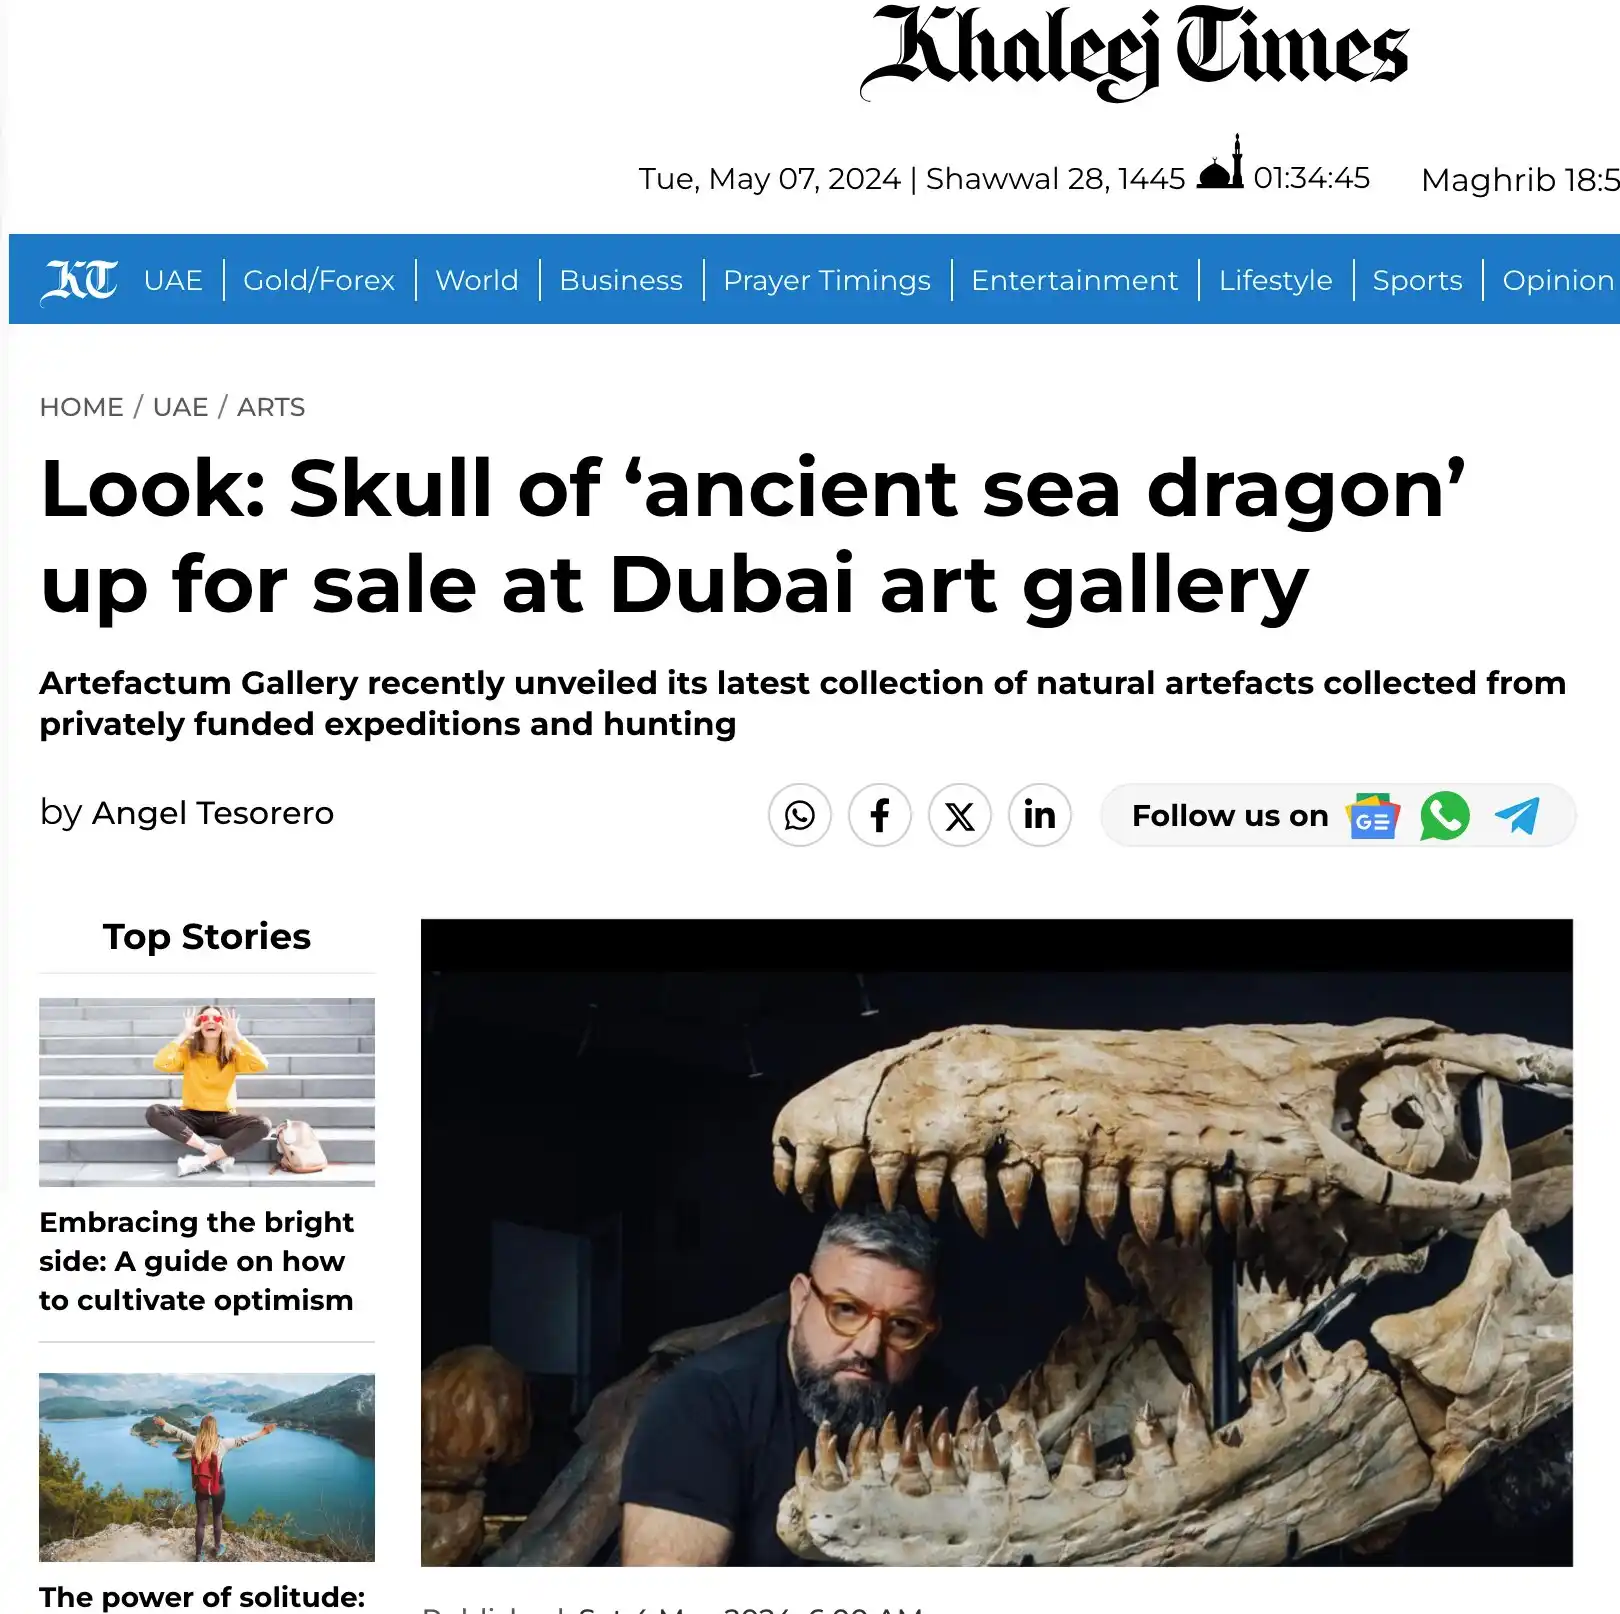 Look: Skull of ‘ancient sea dragon’ up for sale at Dubai art gallery